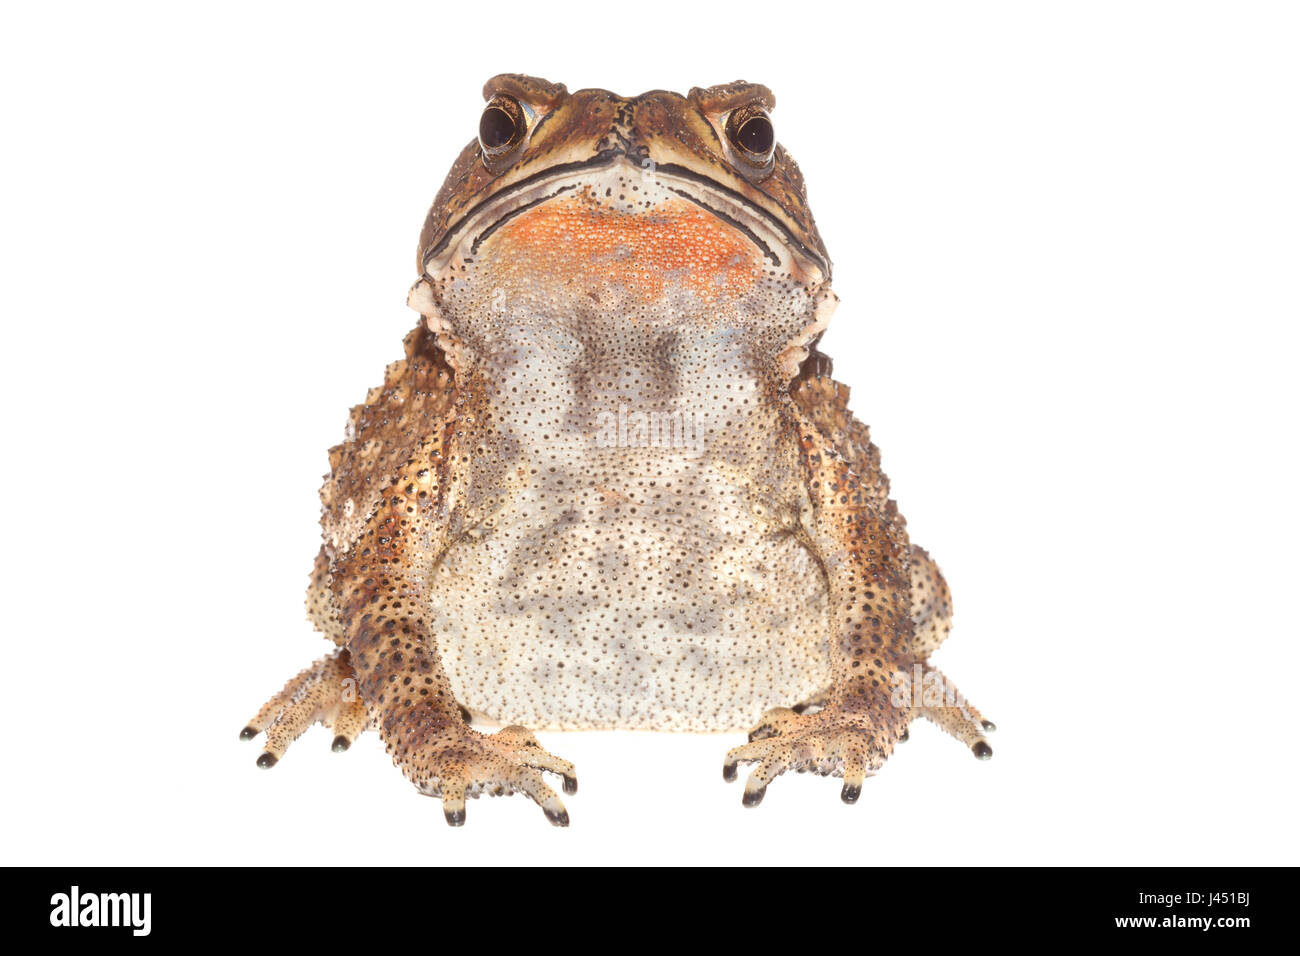 common indian toad isolated against a white background Stock Photo